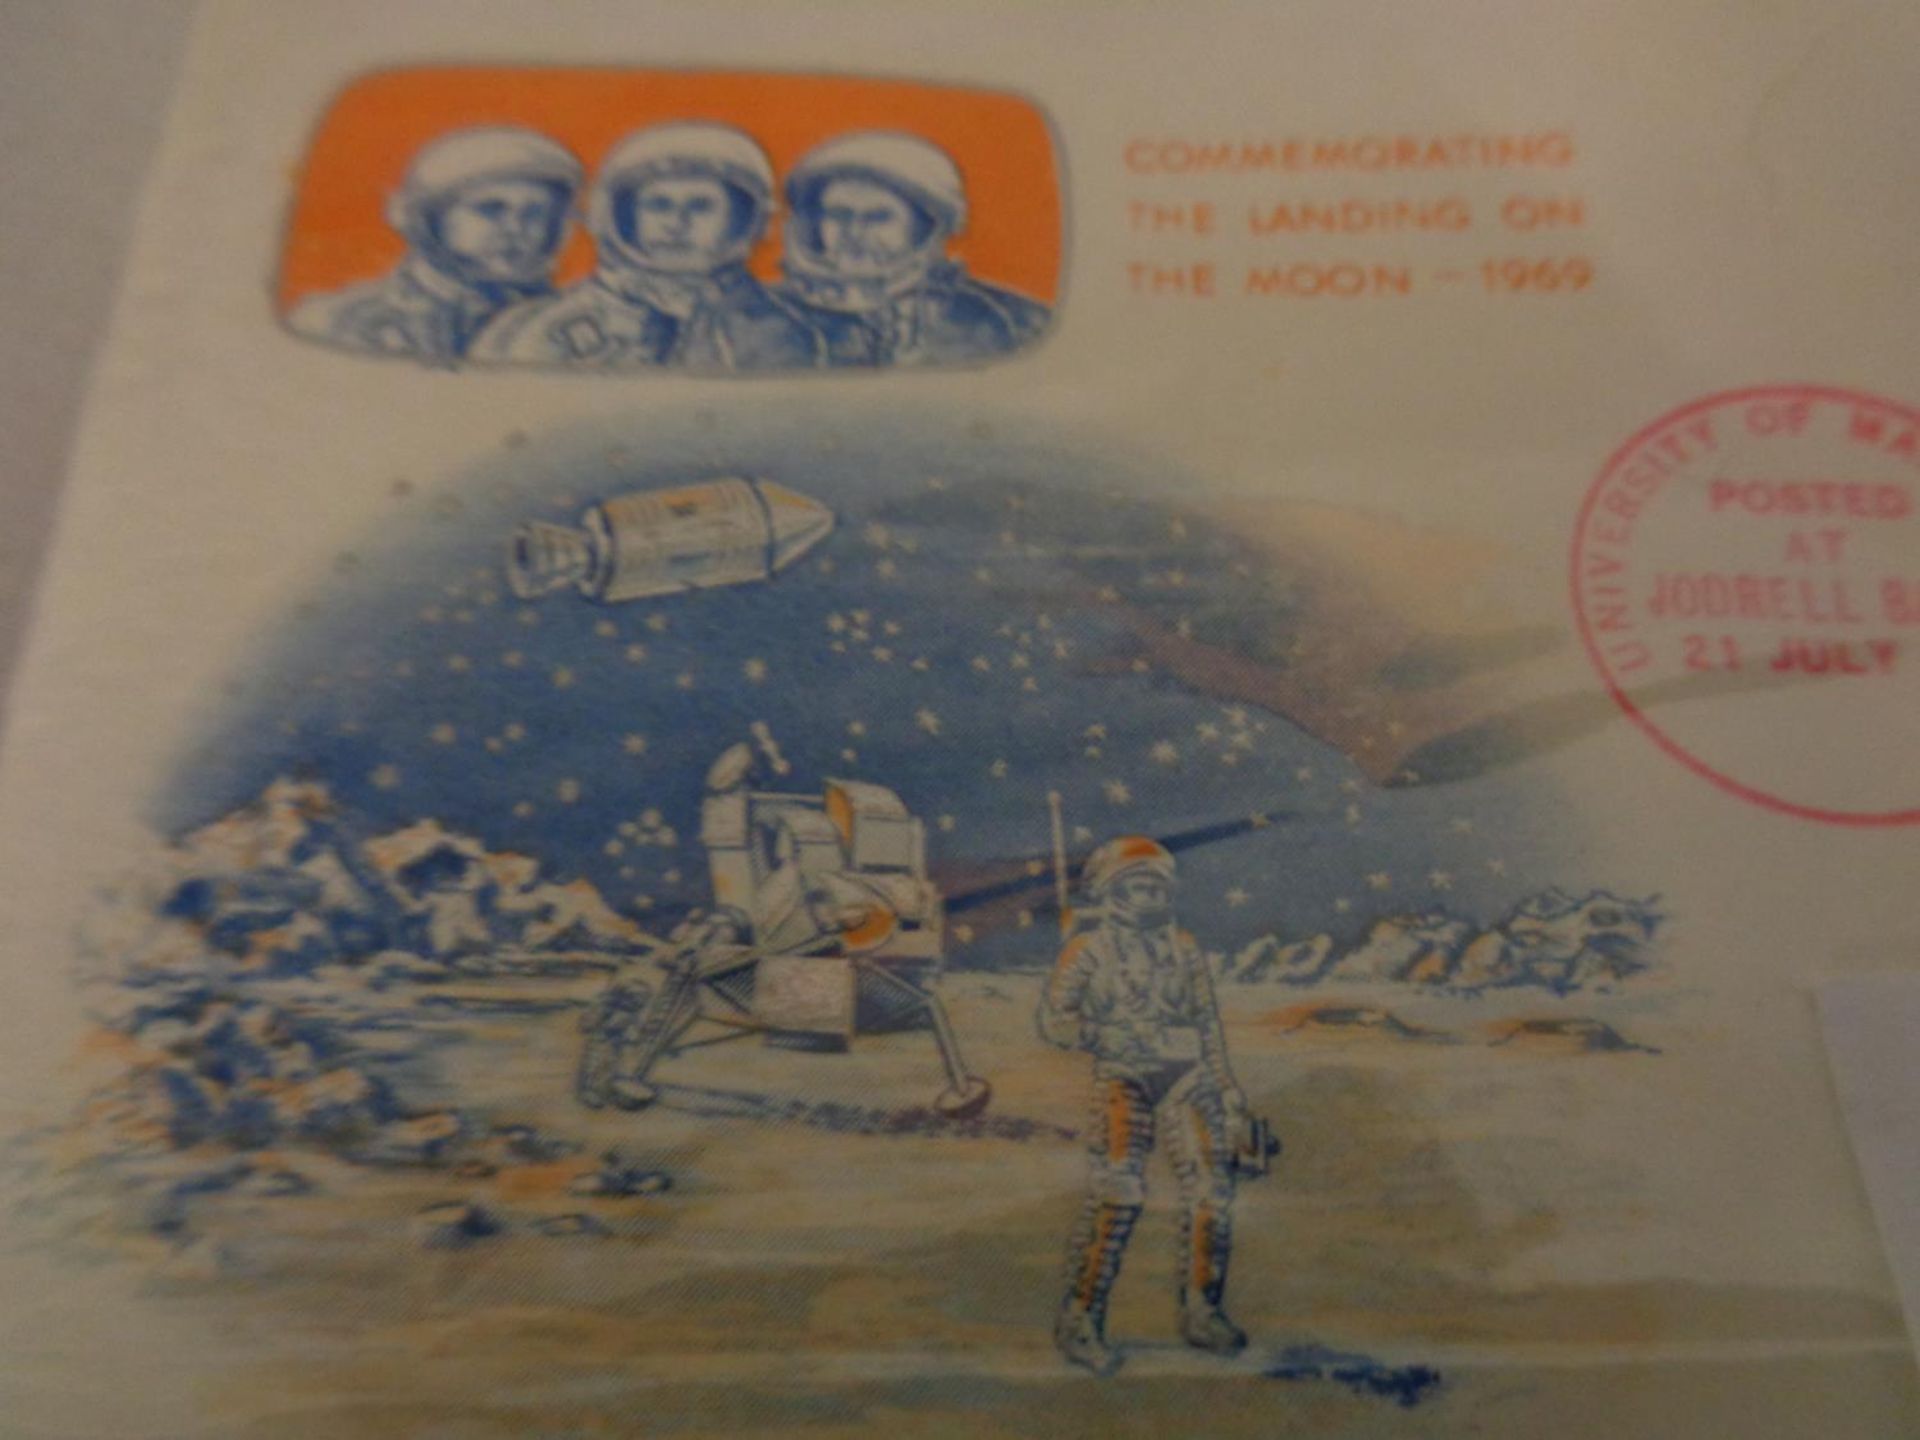 A GB FIRST DAY COVER FEATURING JODRELL BANK . THE COVER HAS THE STAMP TIED BY THE FDI CANCELLATION - Image 2 of 2